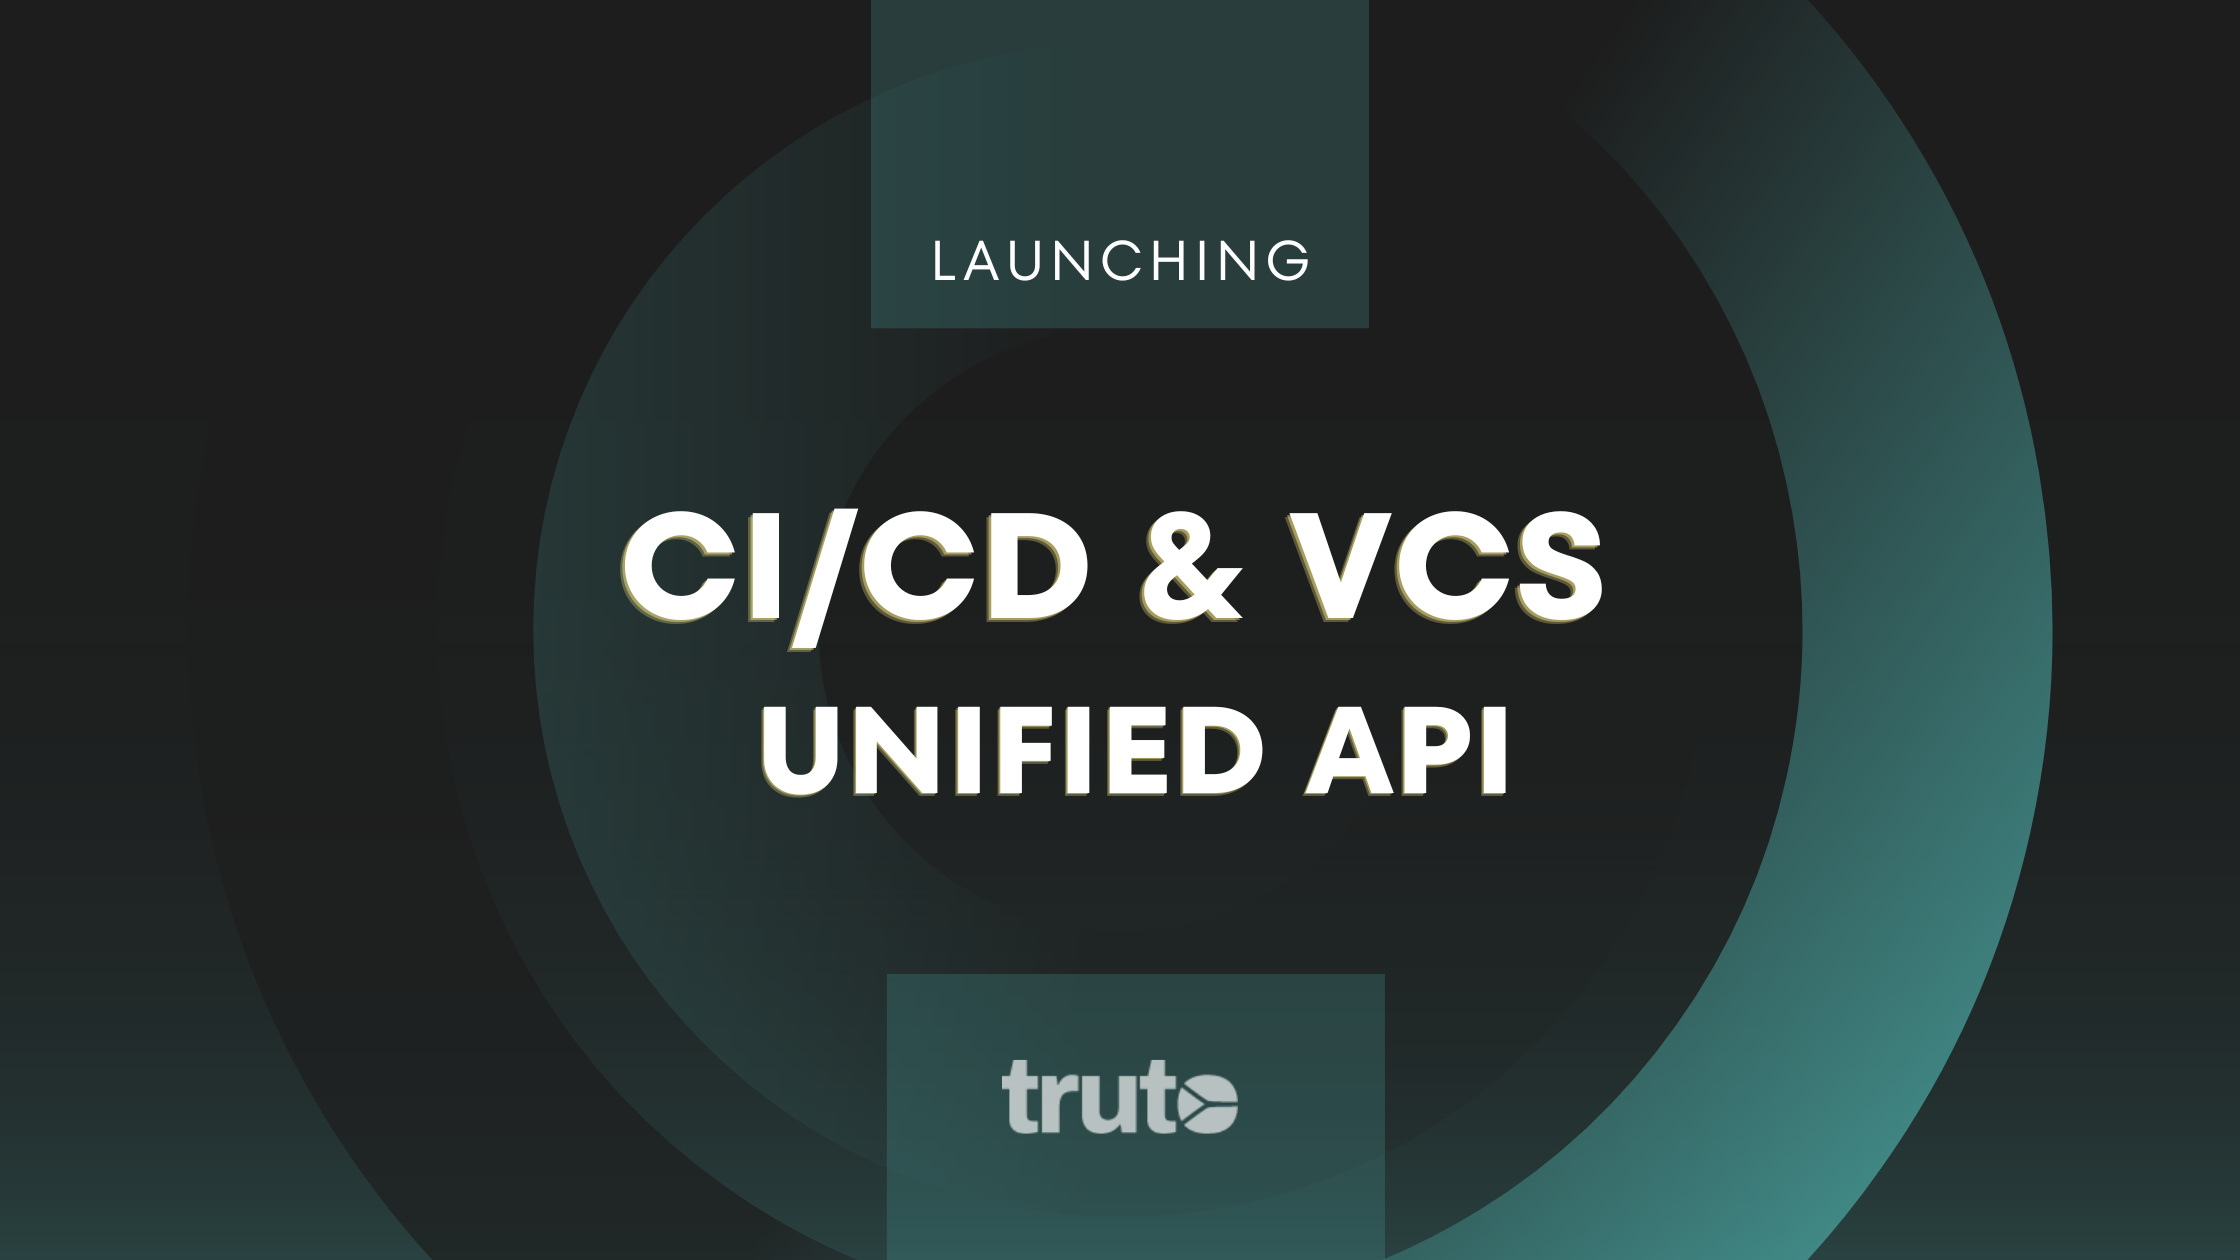 Truto's Unified API for CI/CD & VCS launch